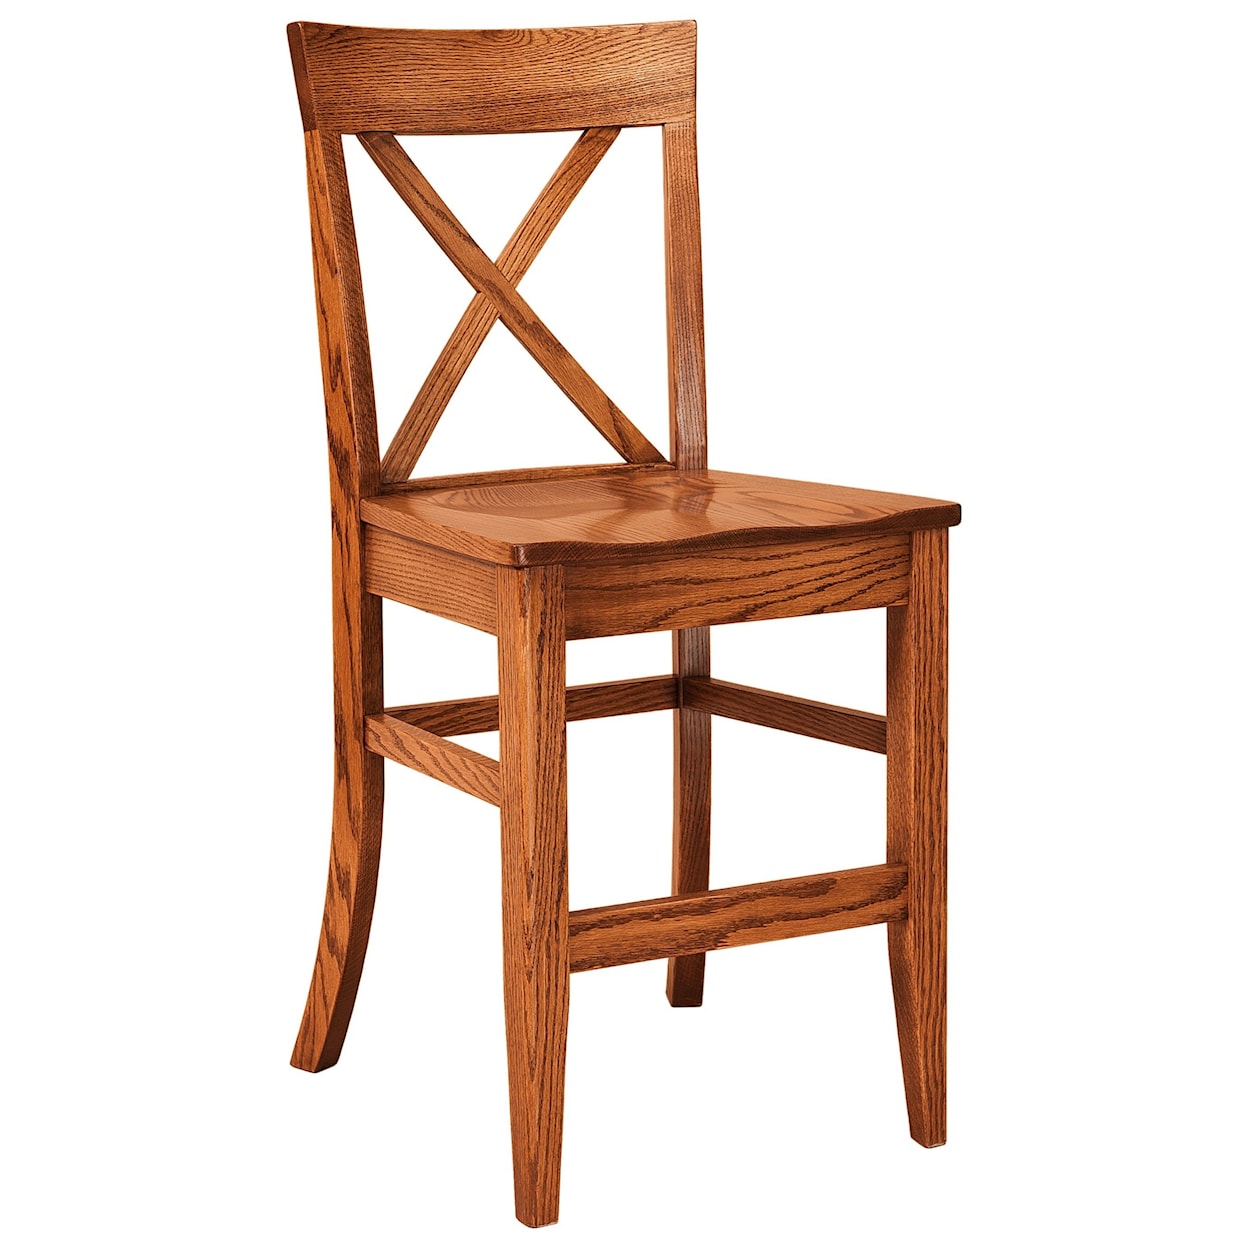 F&N Woodworking Frontier Stationary Bar Stool - Fabric Seat